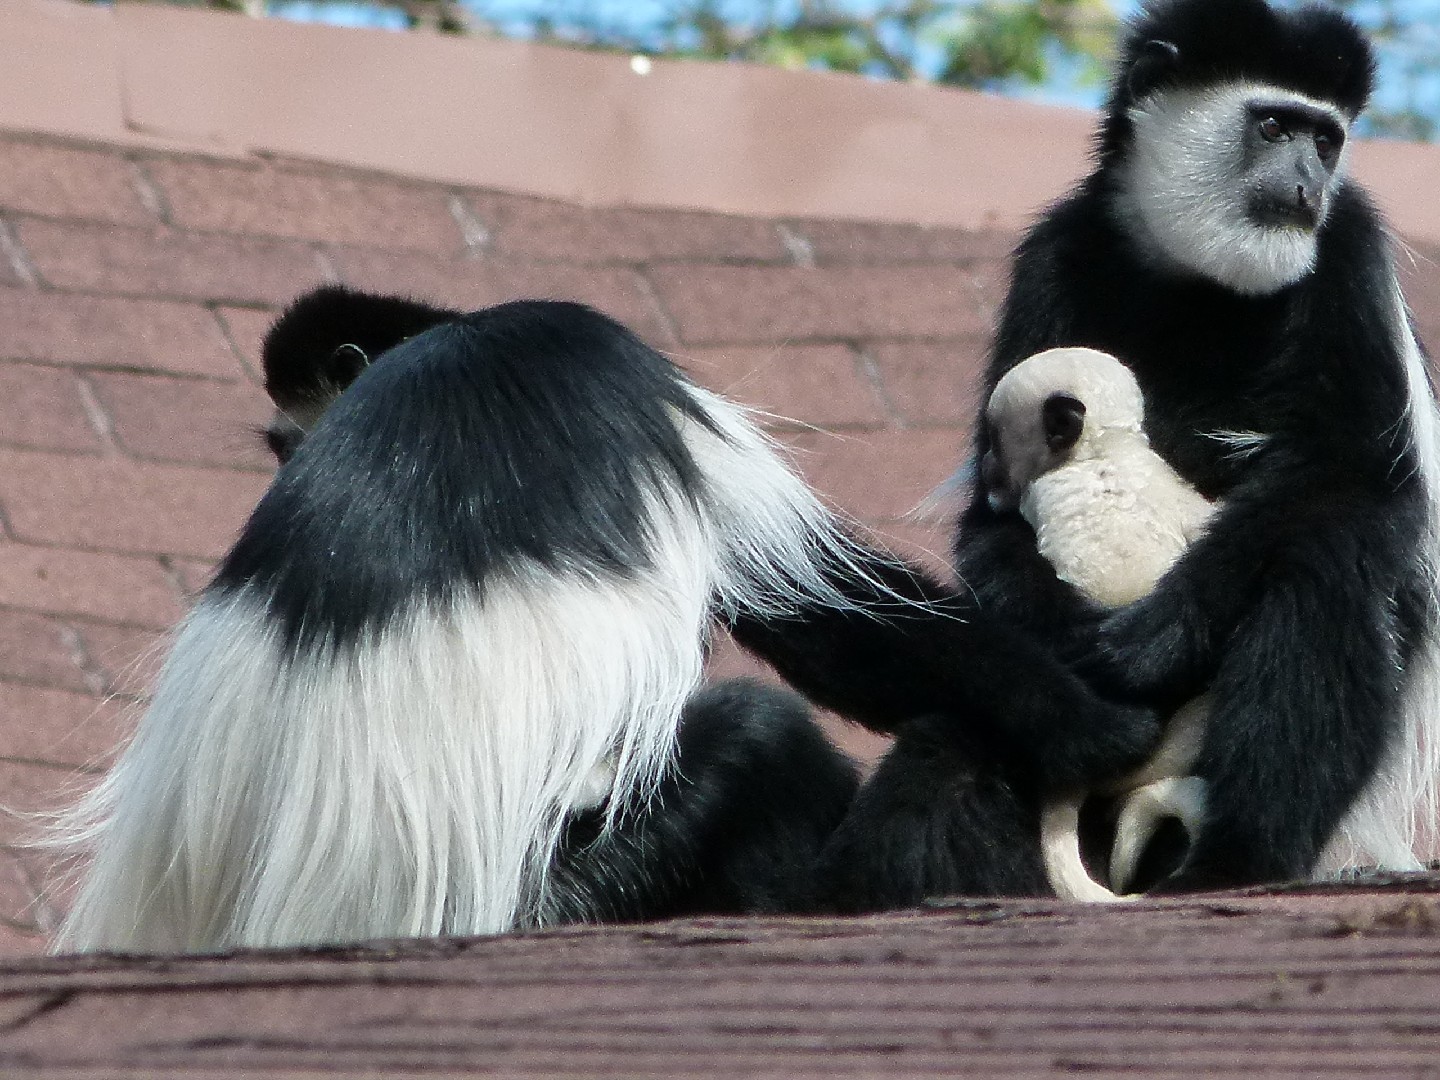 Black-and-white colobuses (Colobus)